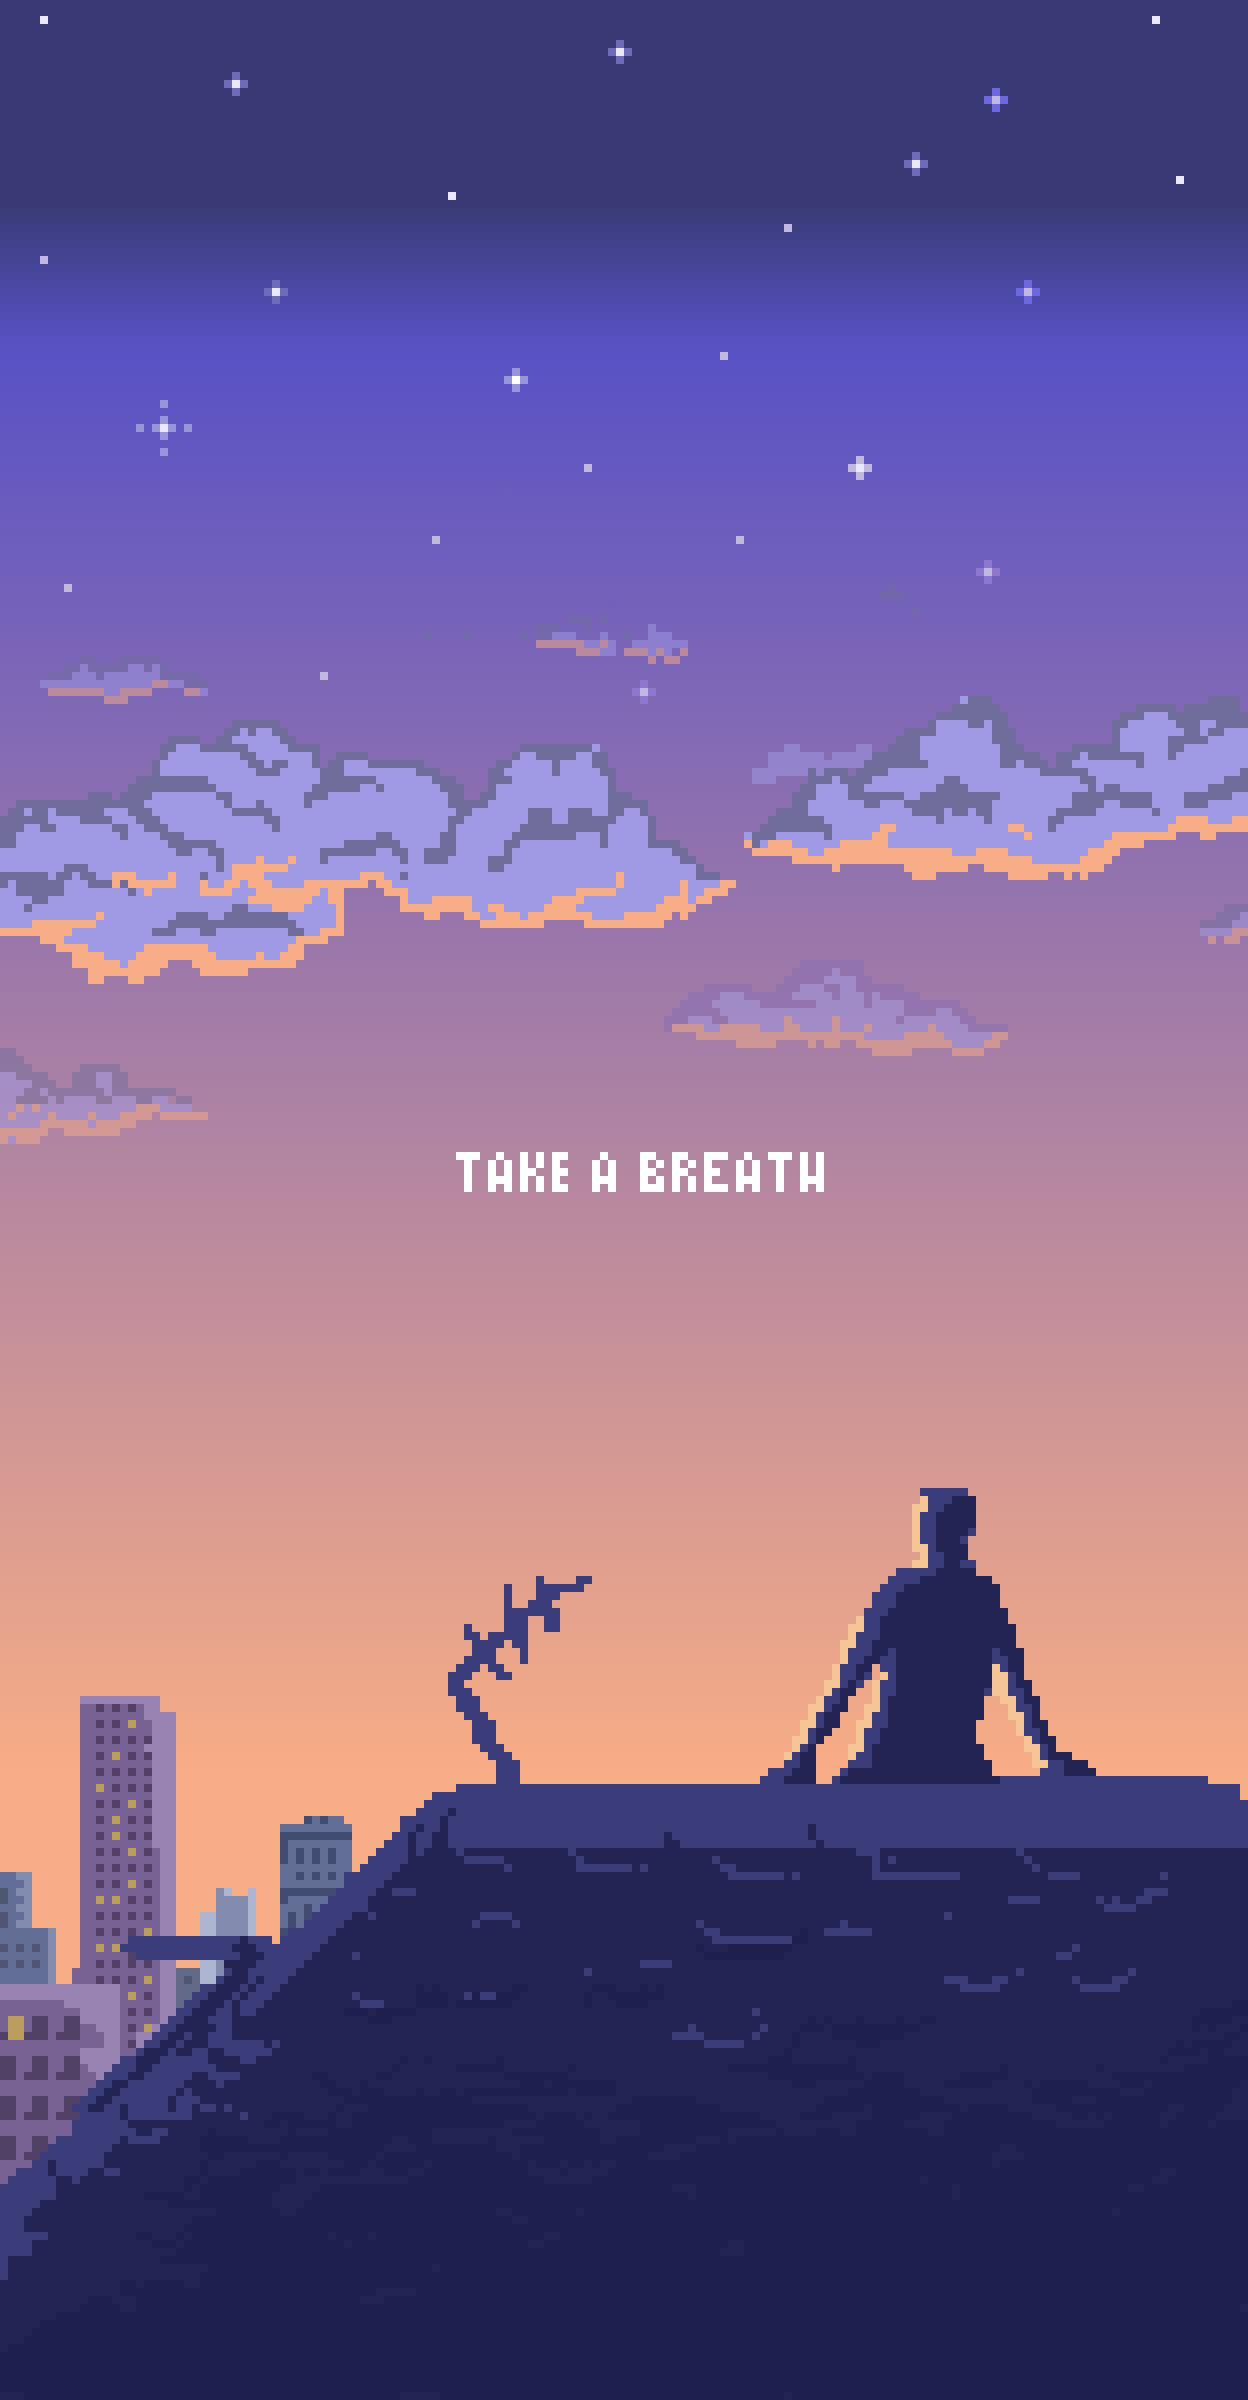 Back with more lofi pixel stuff! Feel free to use as phone wallpaper. Hope you all enjoy ✌️DM if wanting to use for song covers etc